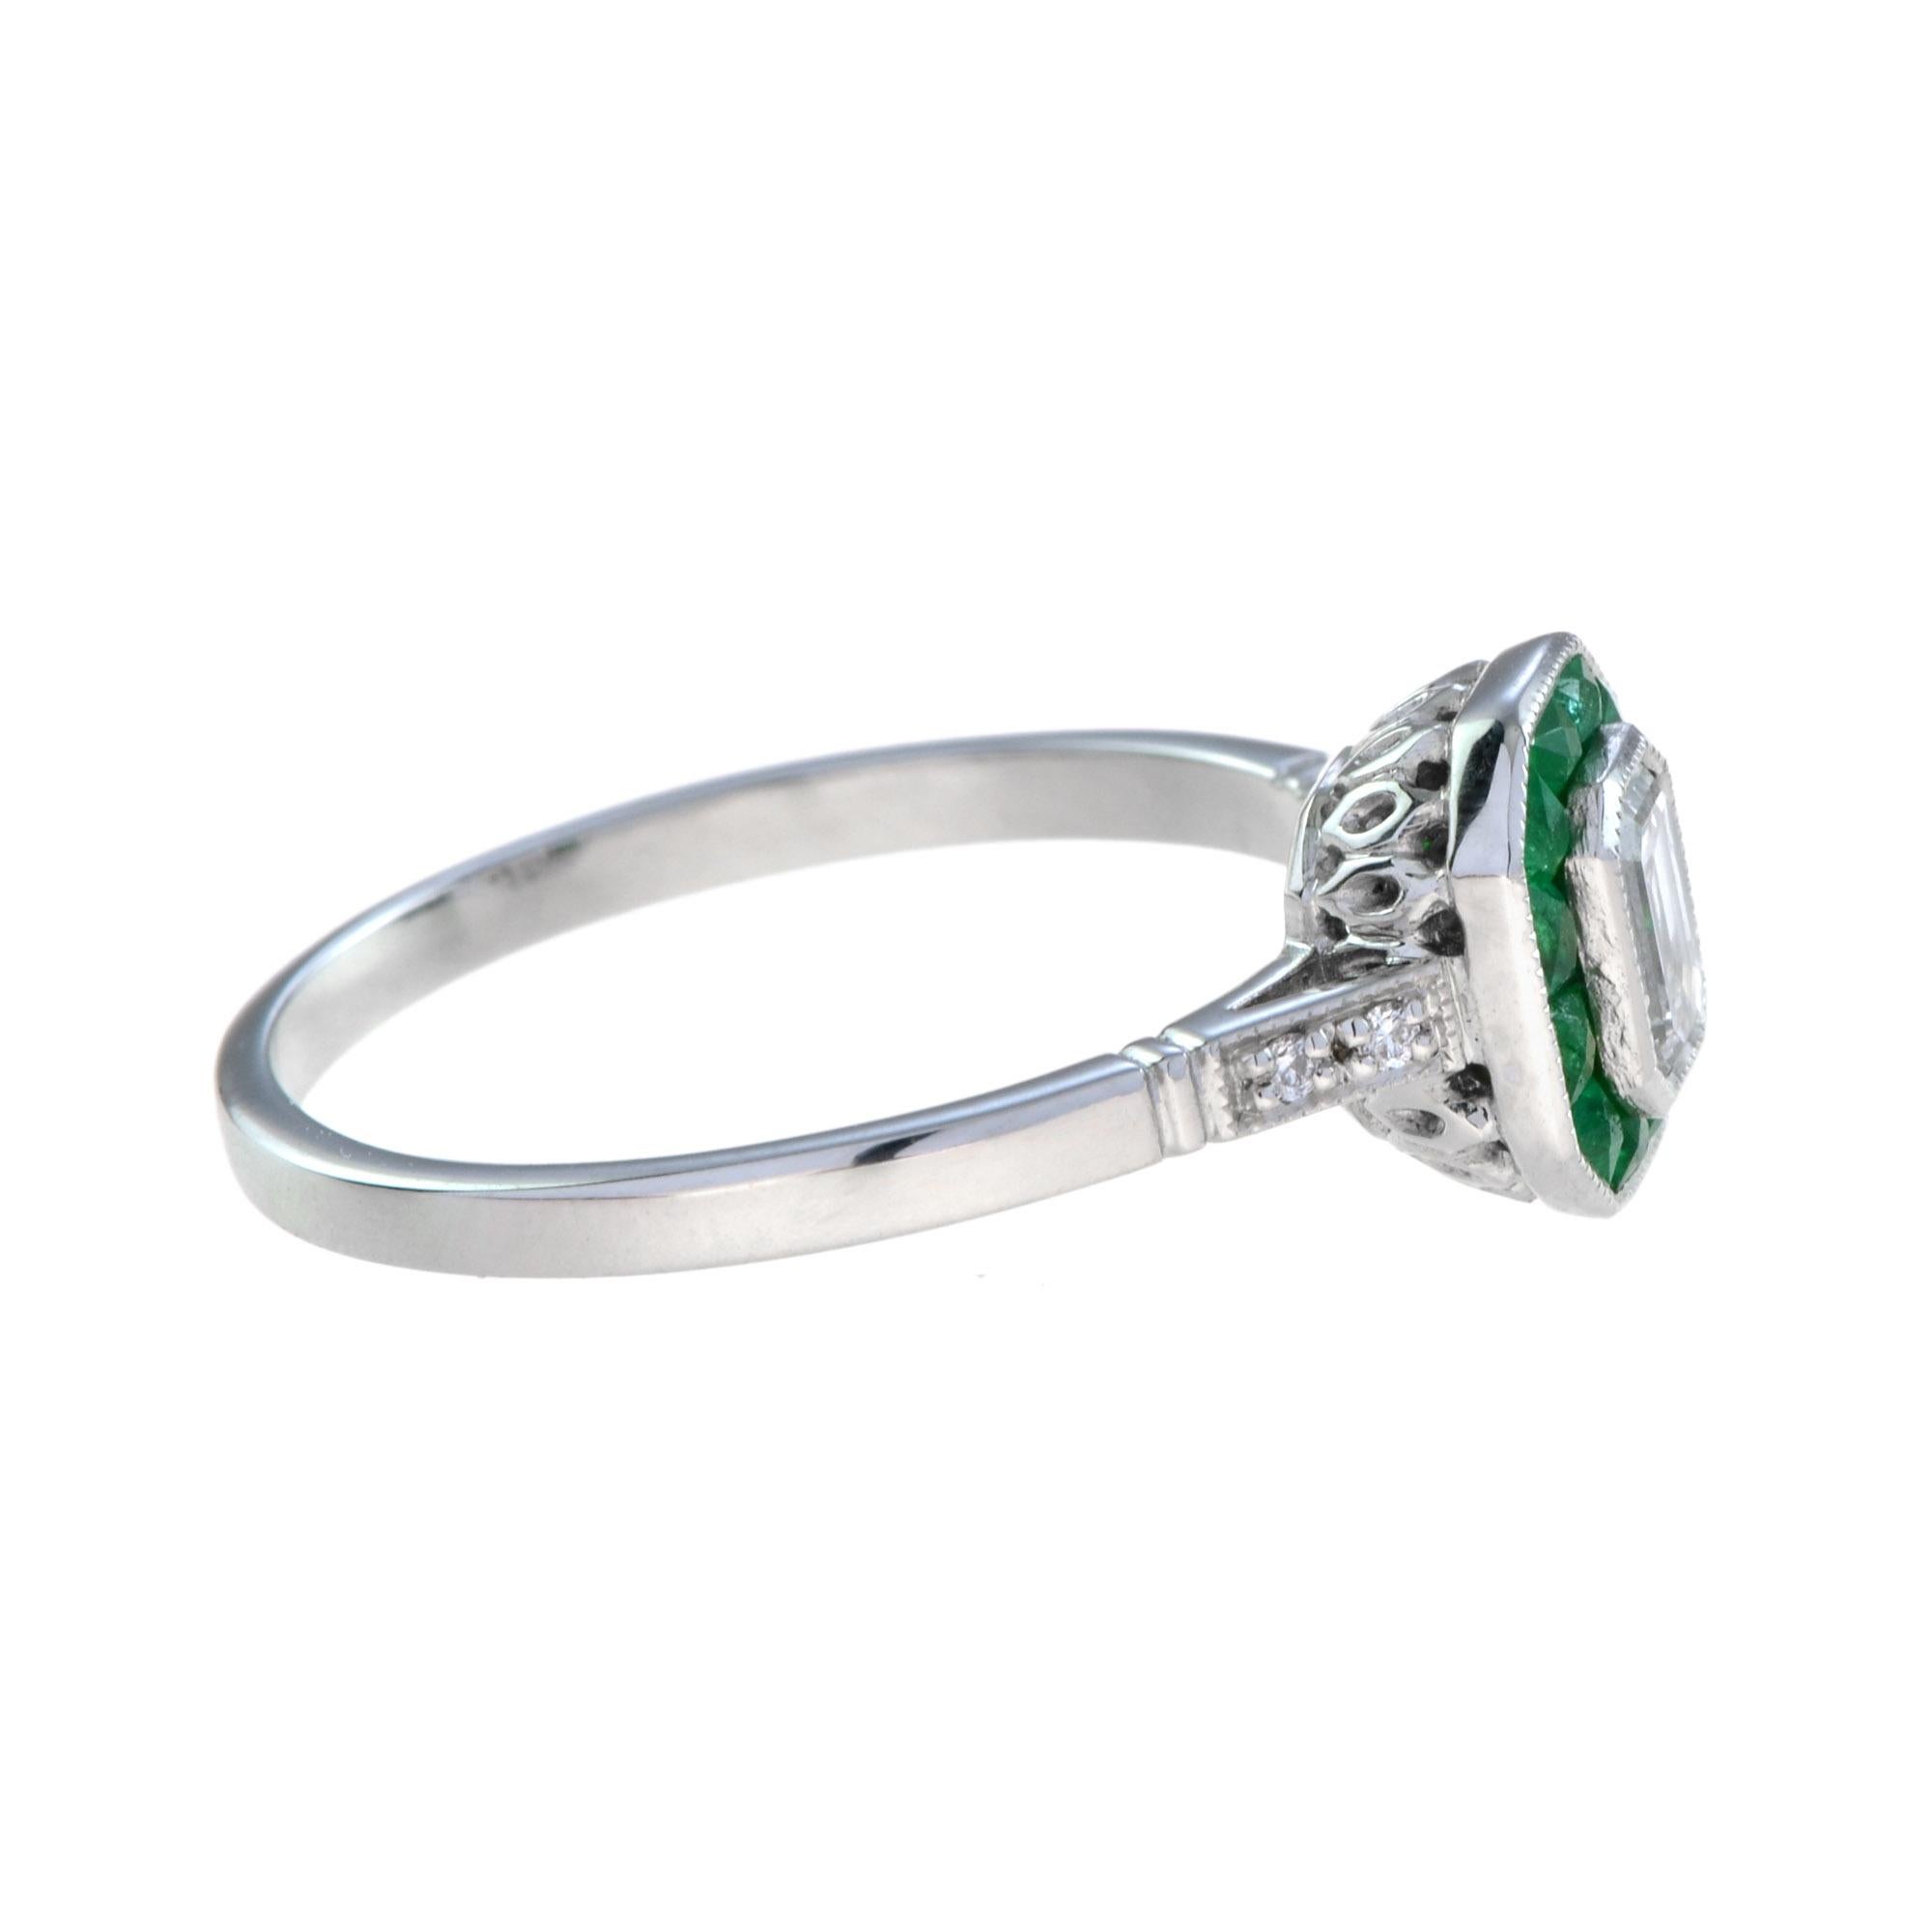 For Sale:  Emerald Cut Diamond and Emerald Art Deco Style Engagement Ring in 18K White Gold 4